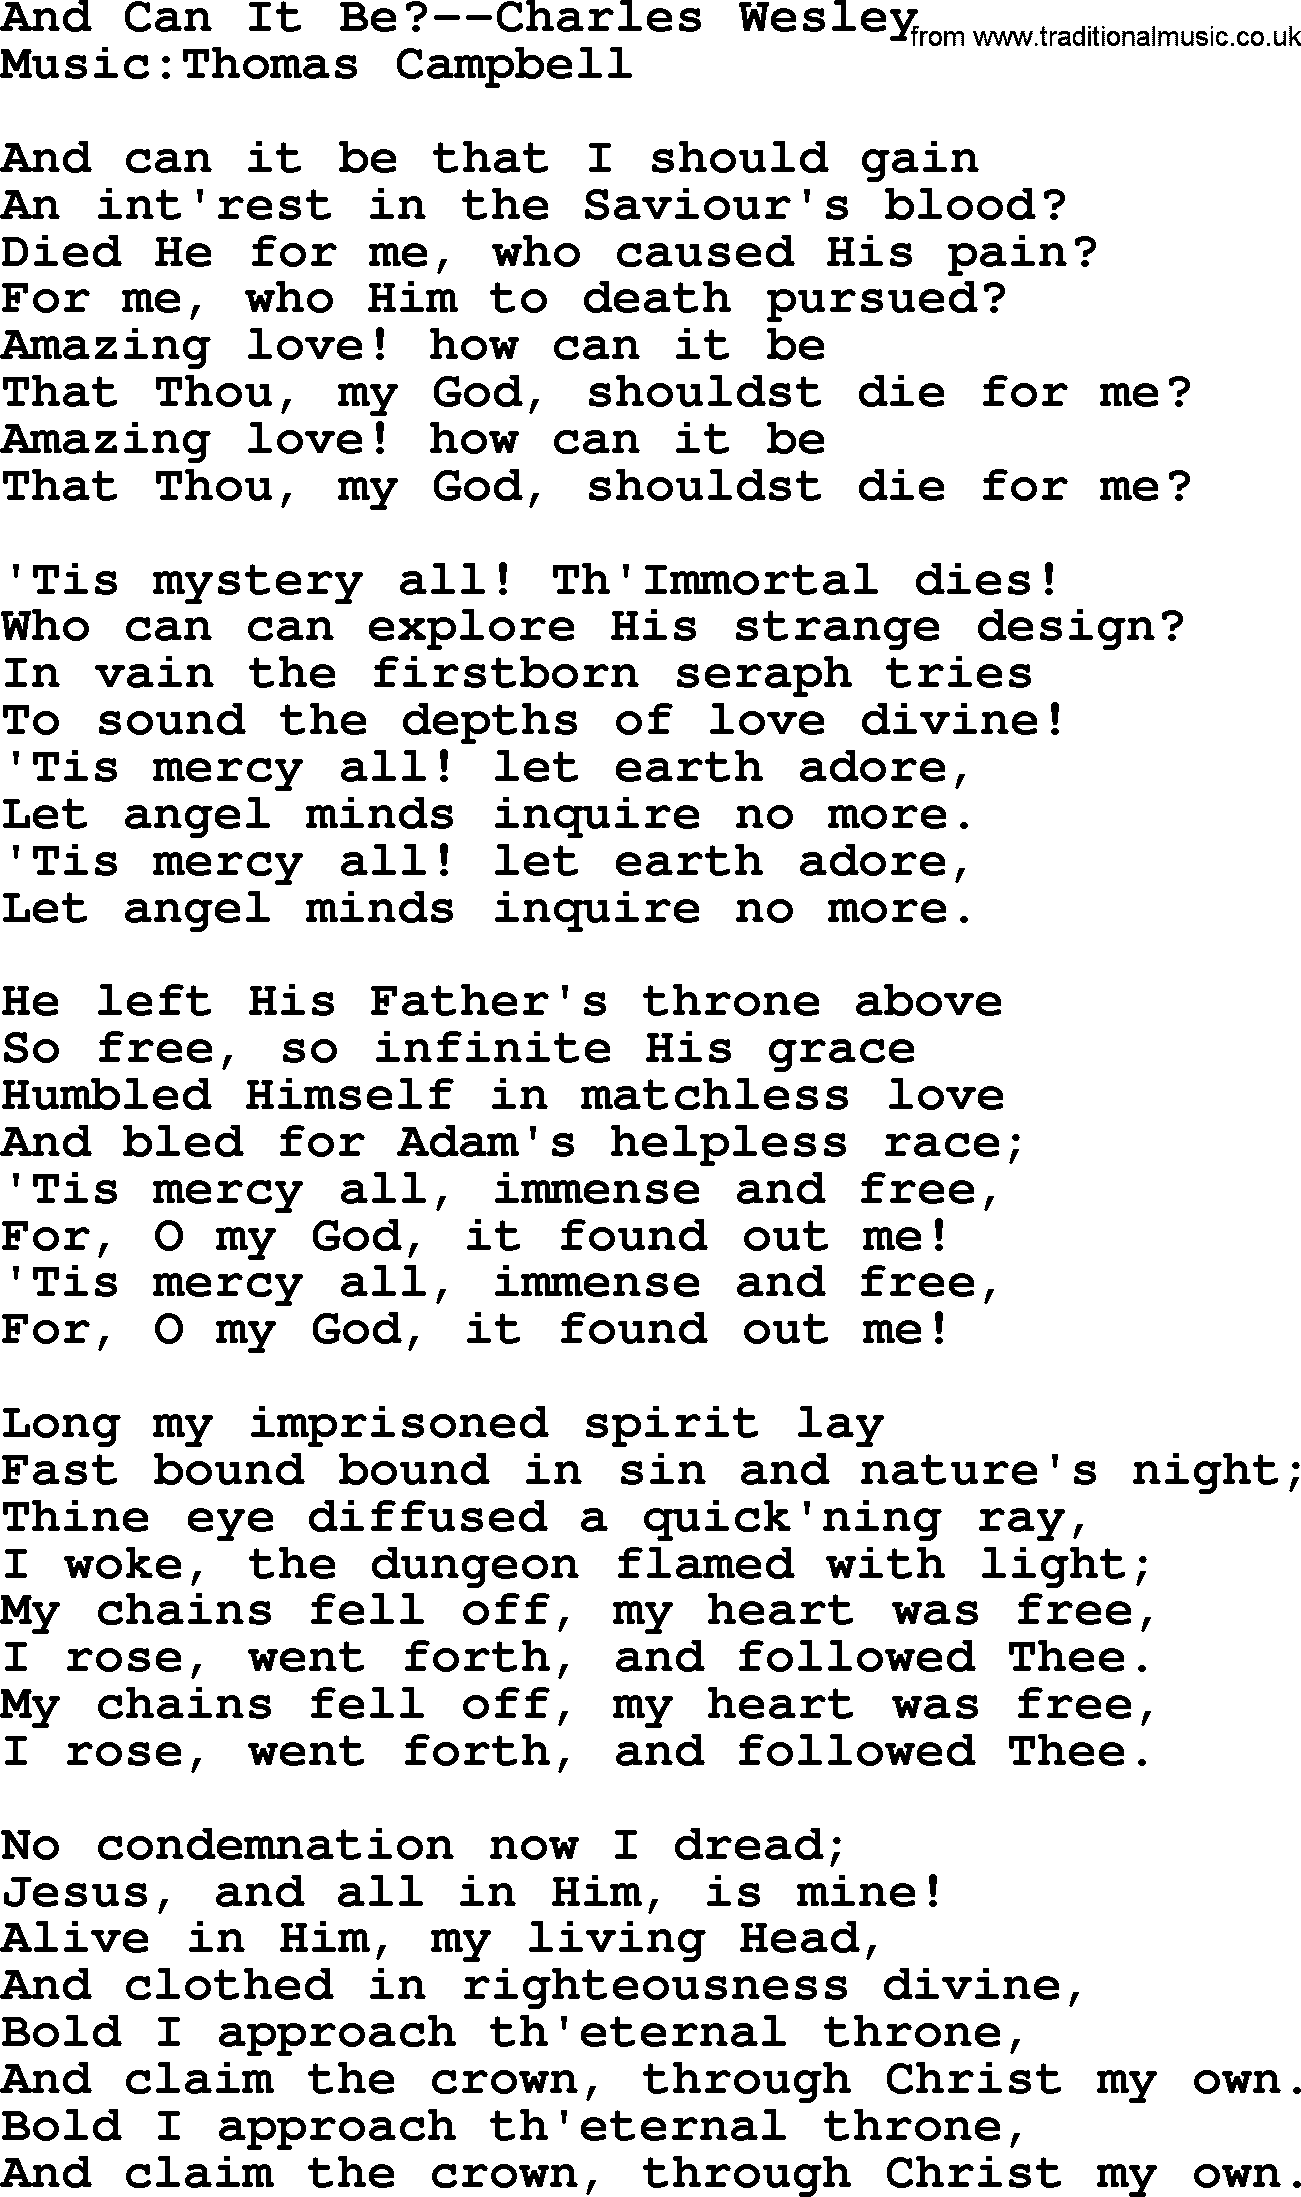 Hymns about Angels, Hymn: And Can It Be--charles Wesley.txt lyrics with PDF